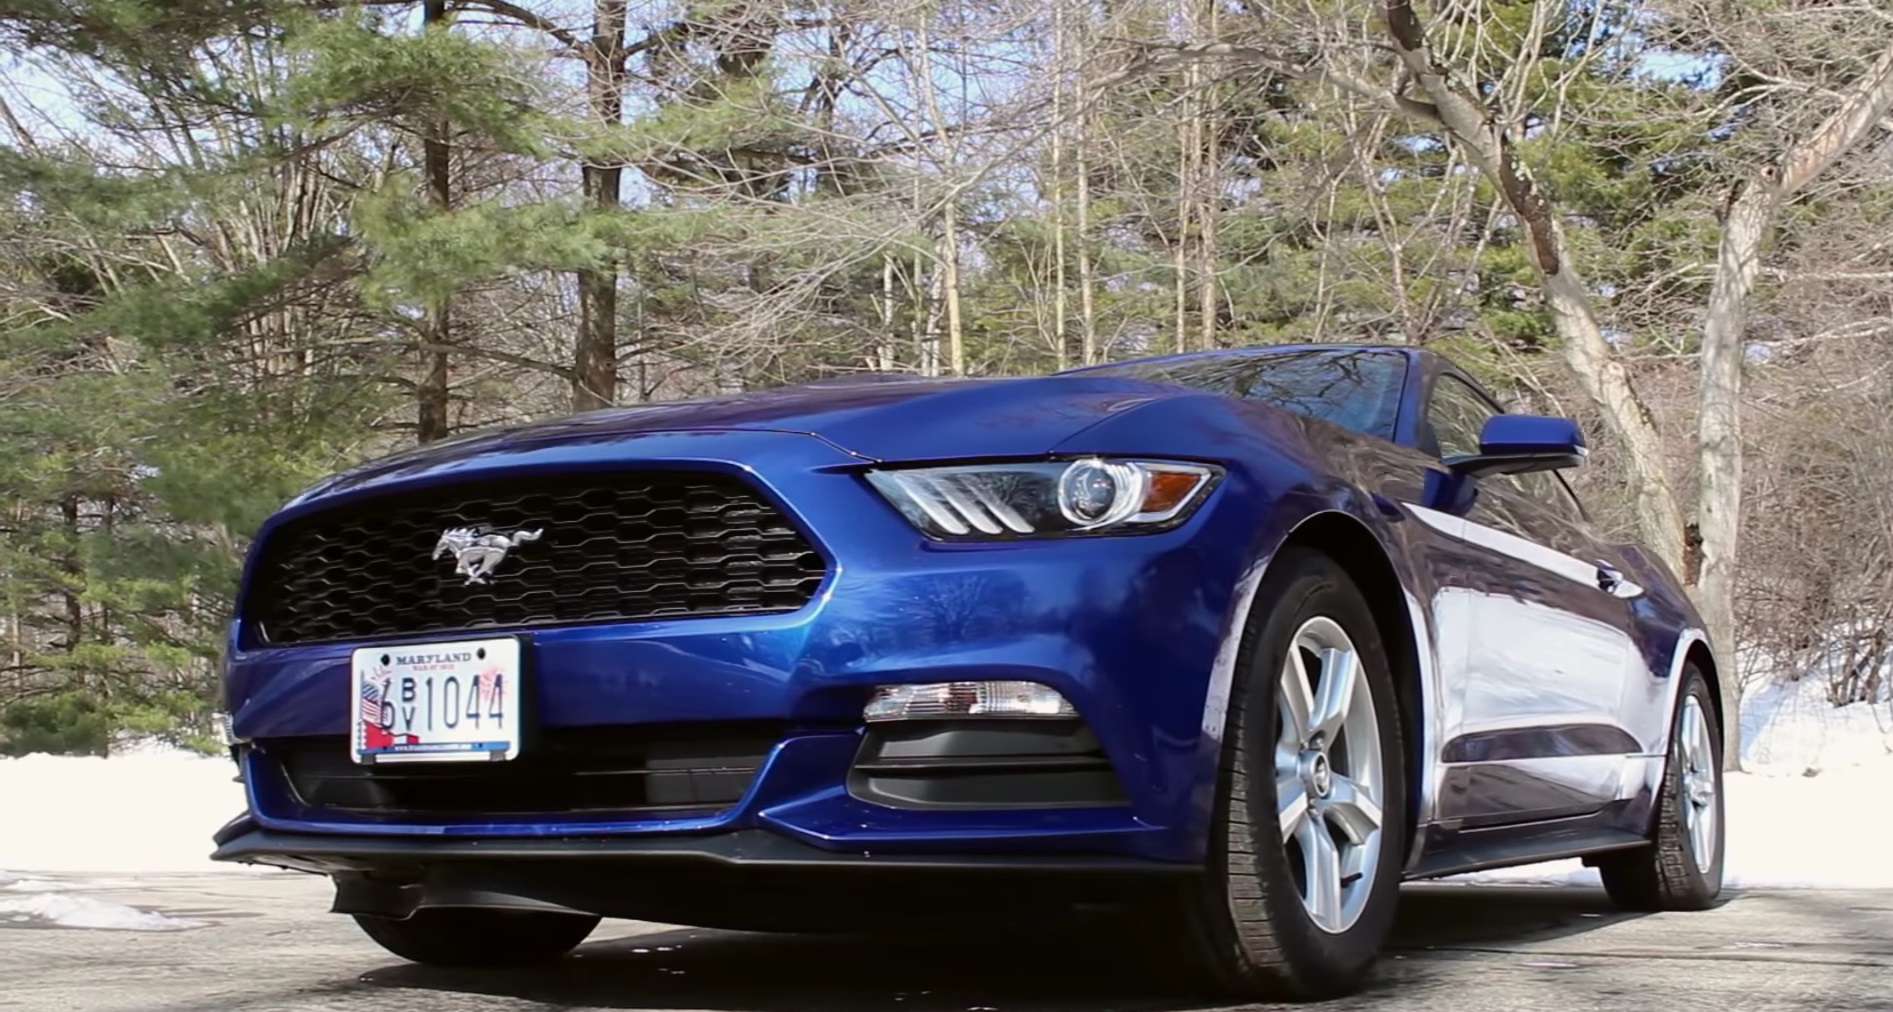 Video: 2015 Ford Mustang V6 In-Depth Review